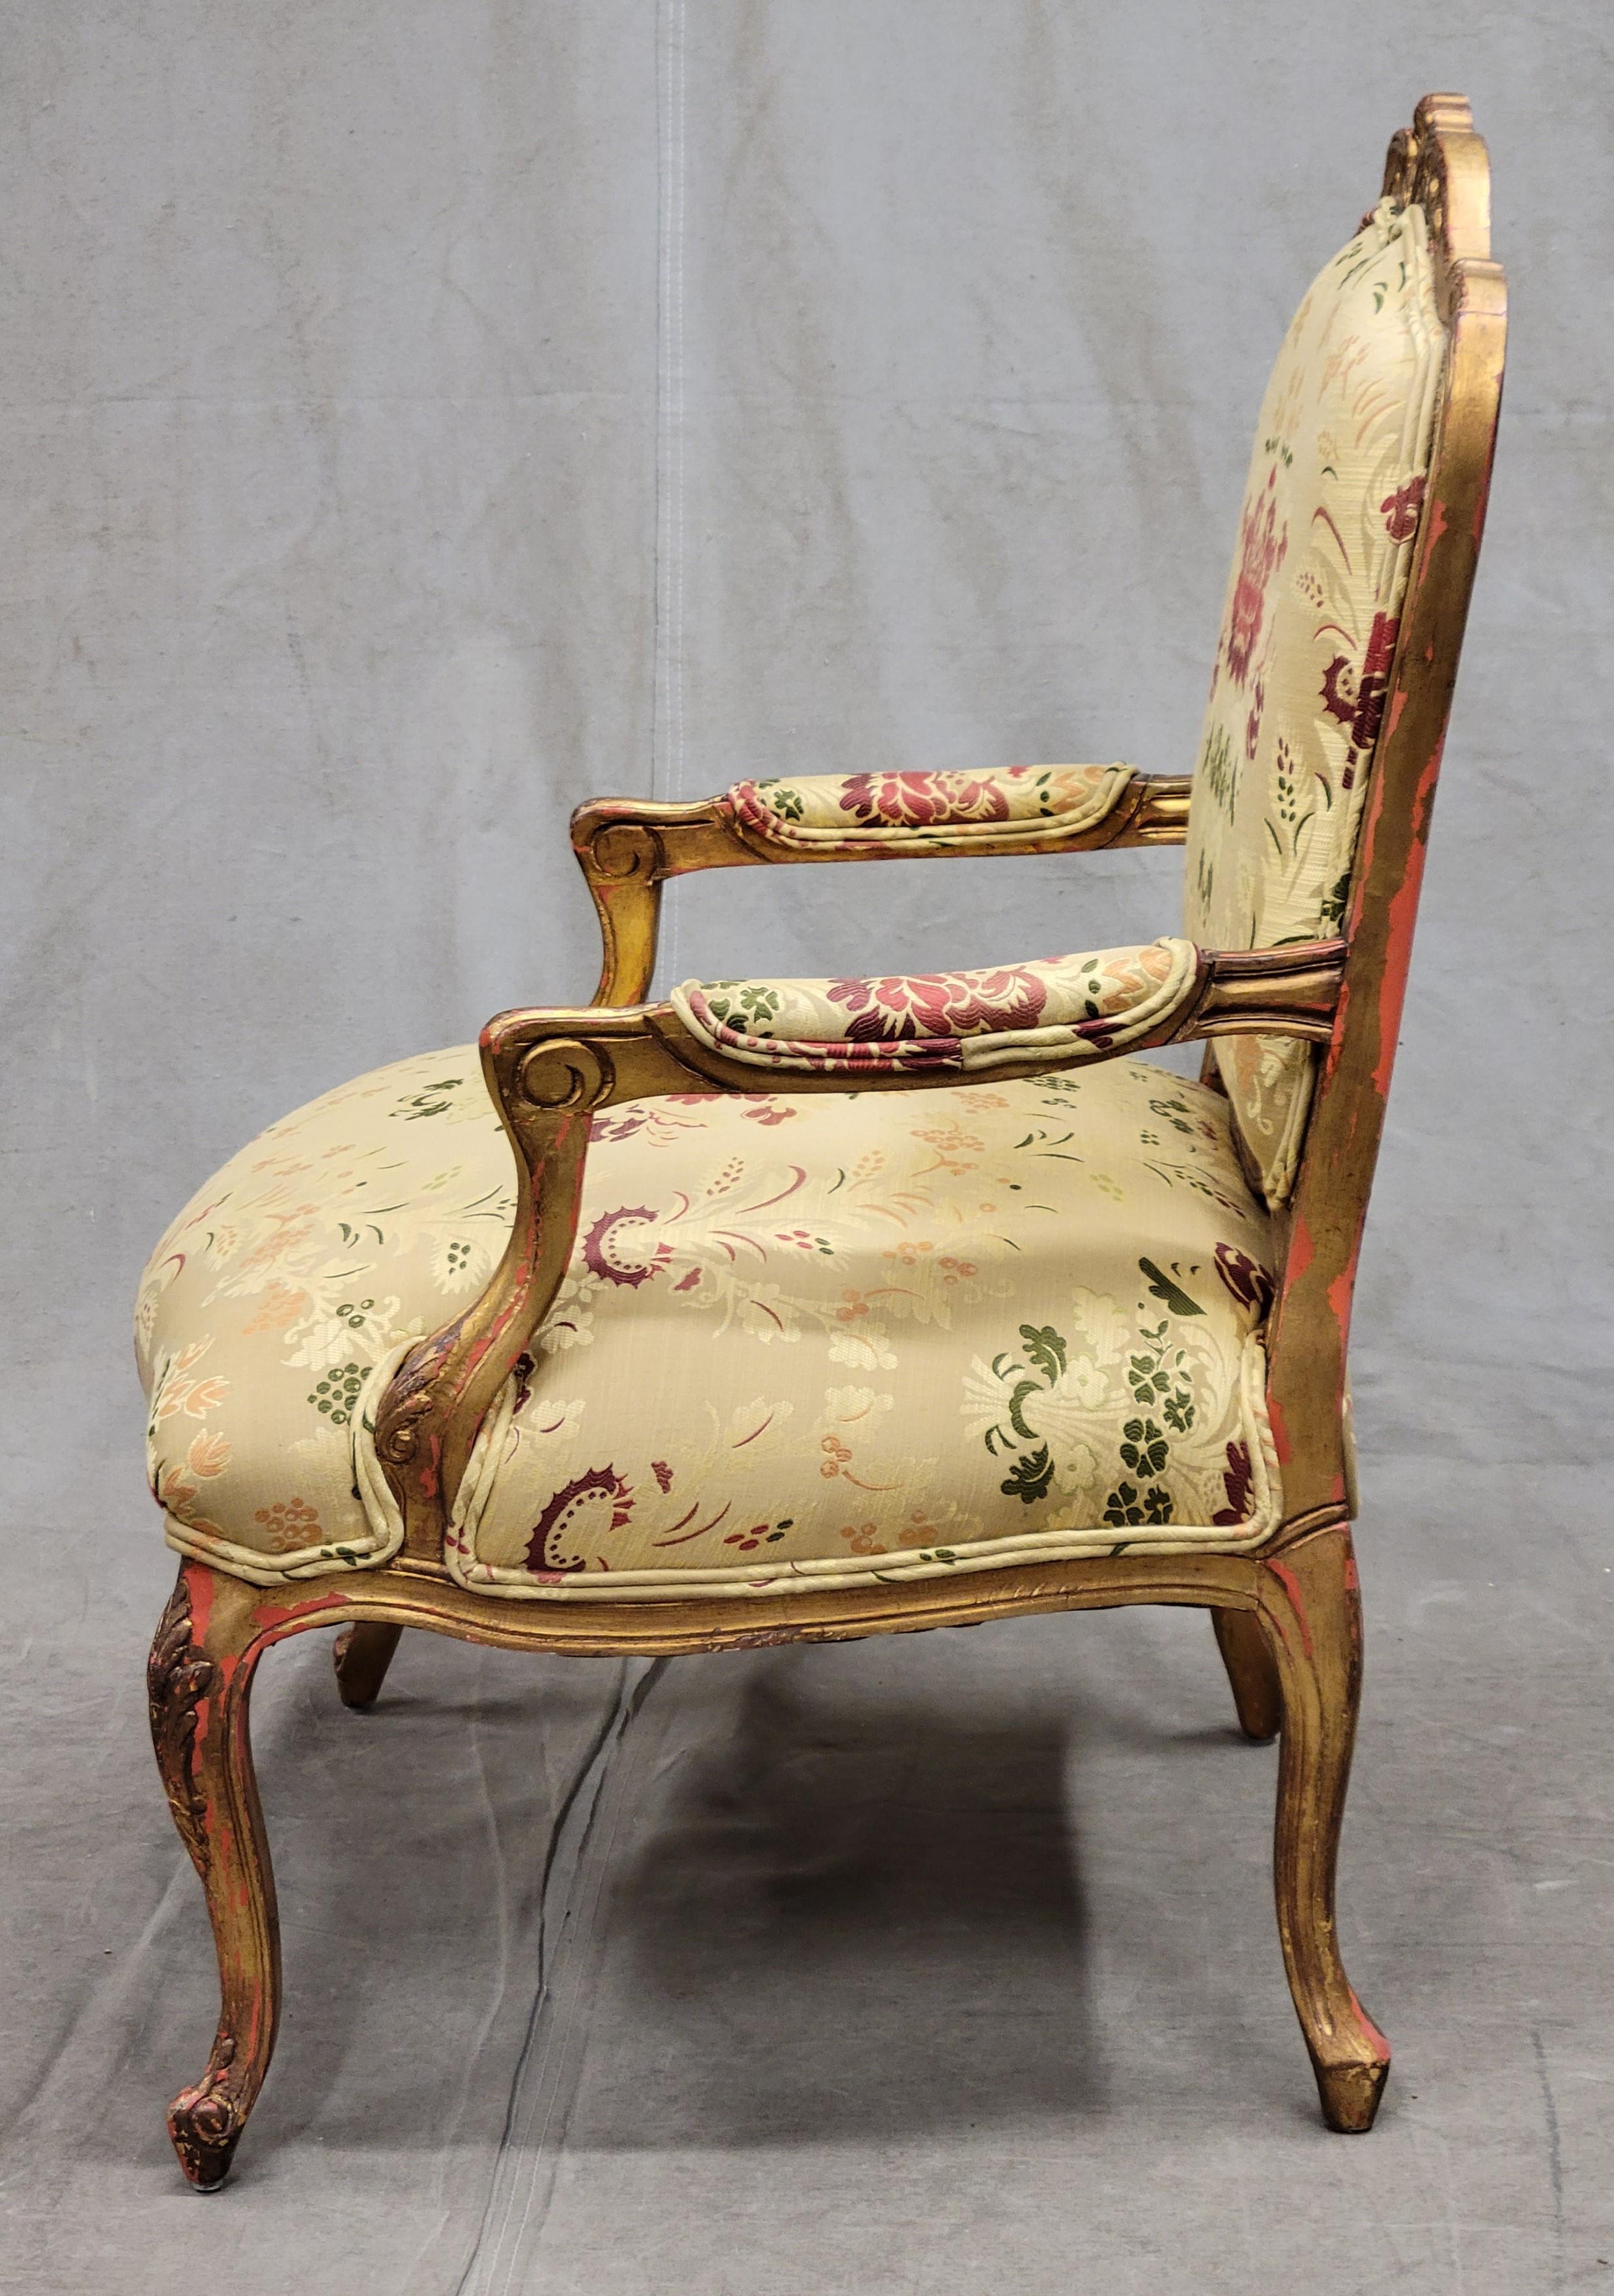 Unknown Vintage French Gold Leaf Bergere Chairs With Designer Damask Upholstery - a Pair